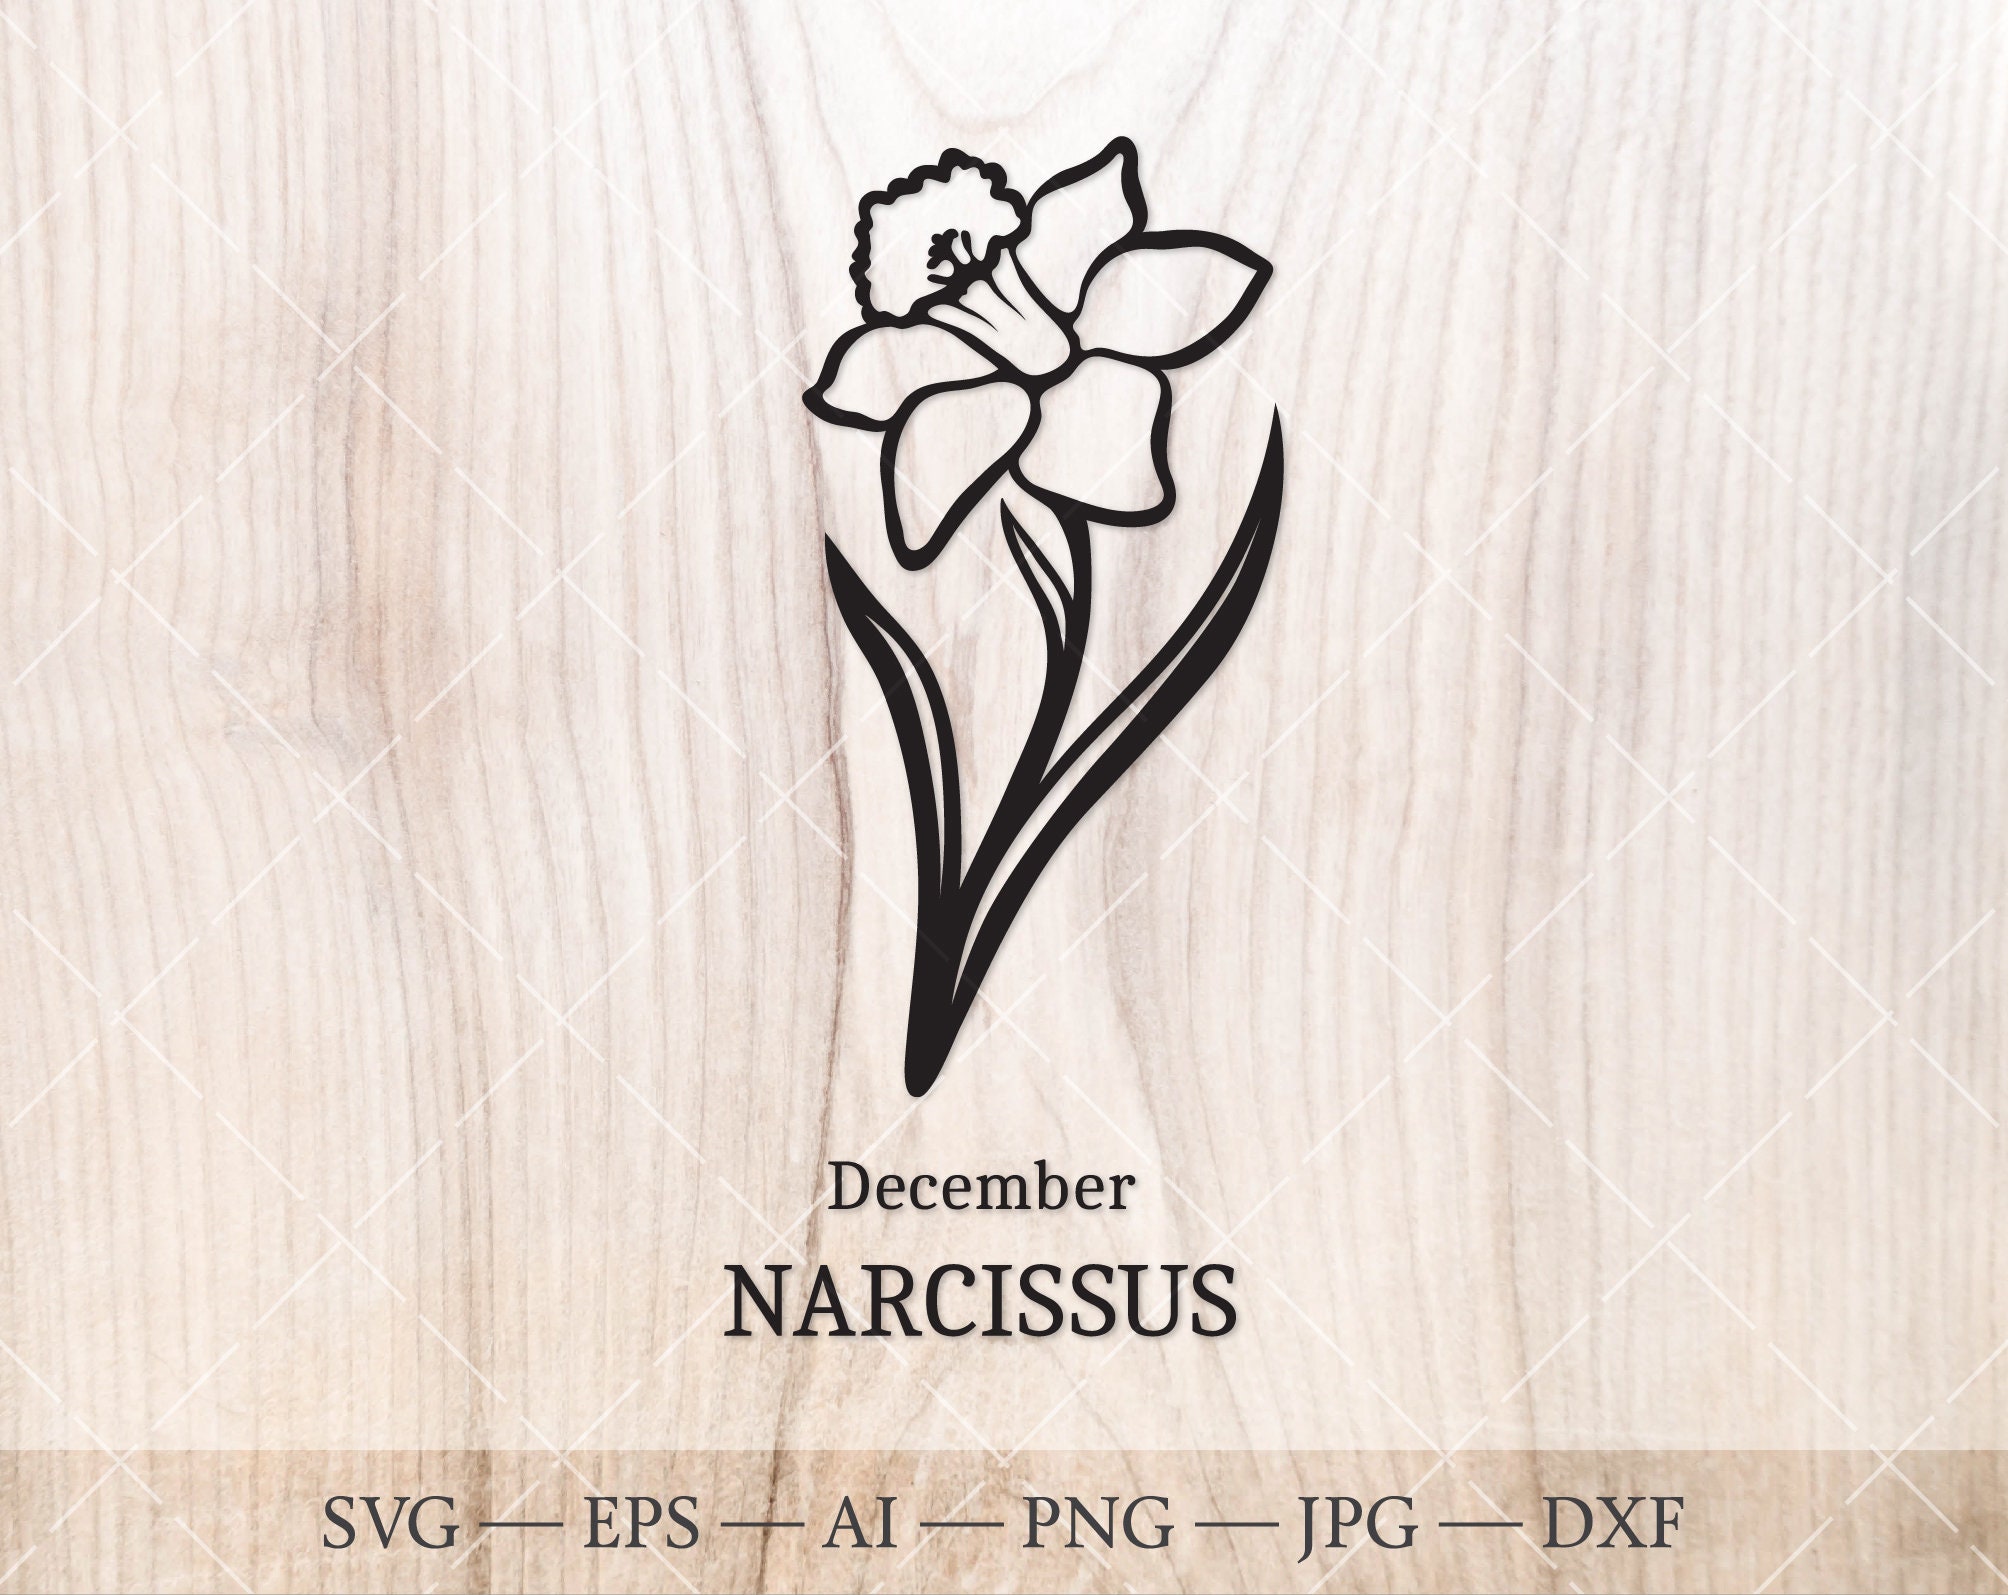 50 Meaningful Narcissus Flower Tattoos Symbolism Designs and Meanings   Tattoo Me Now